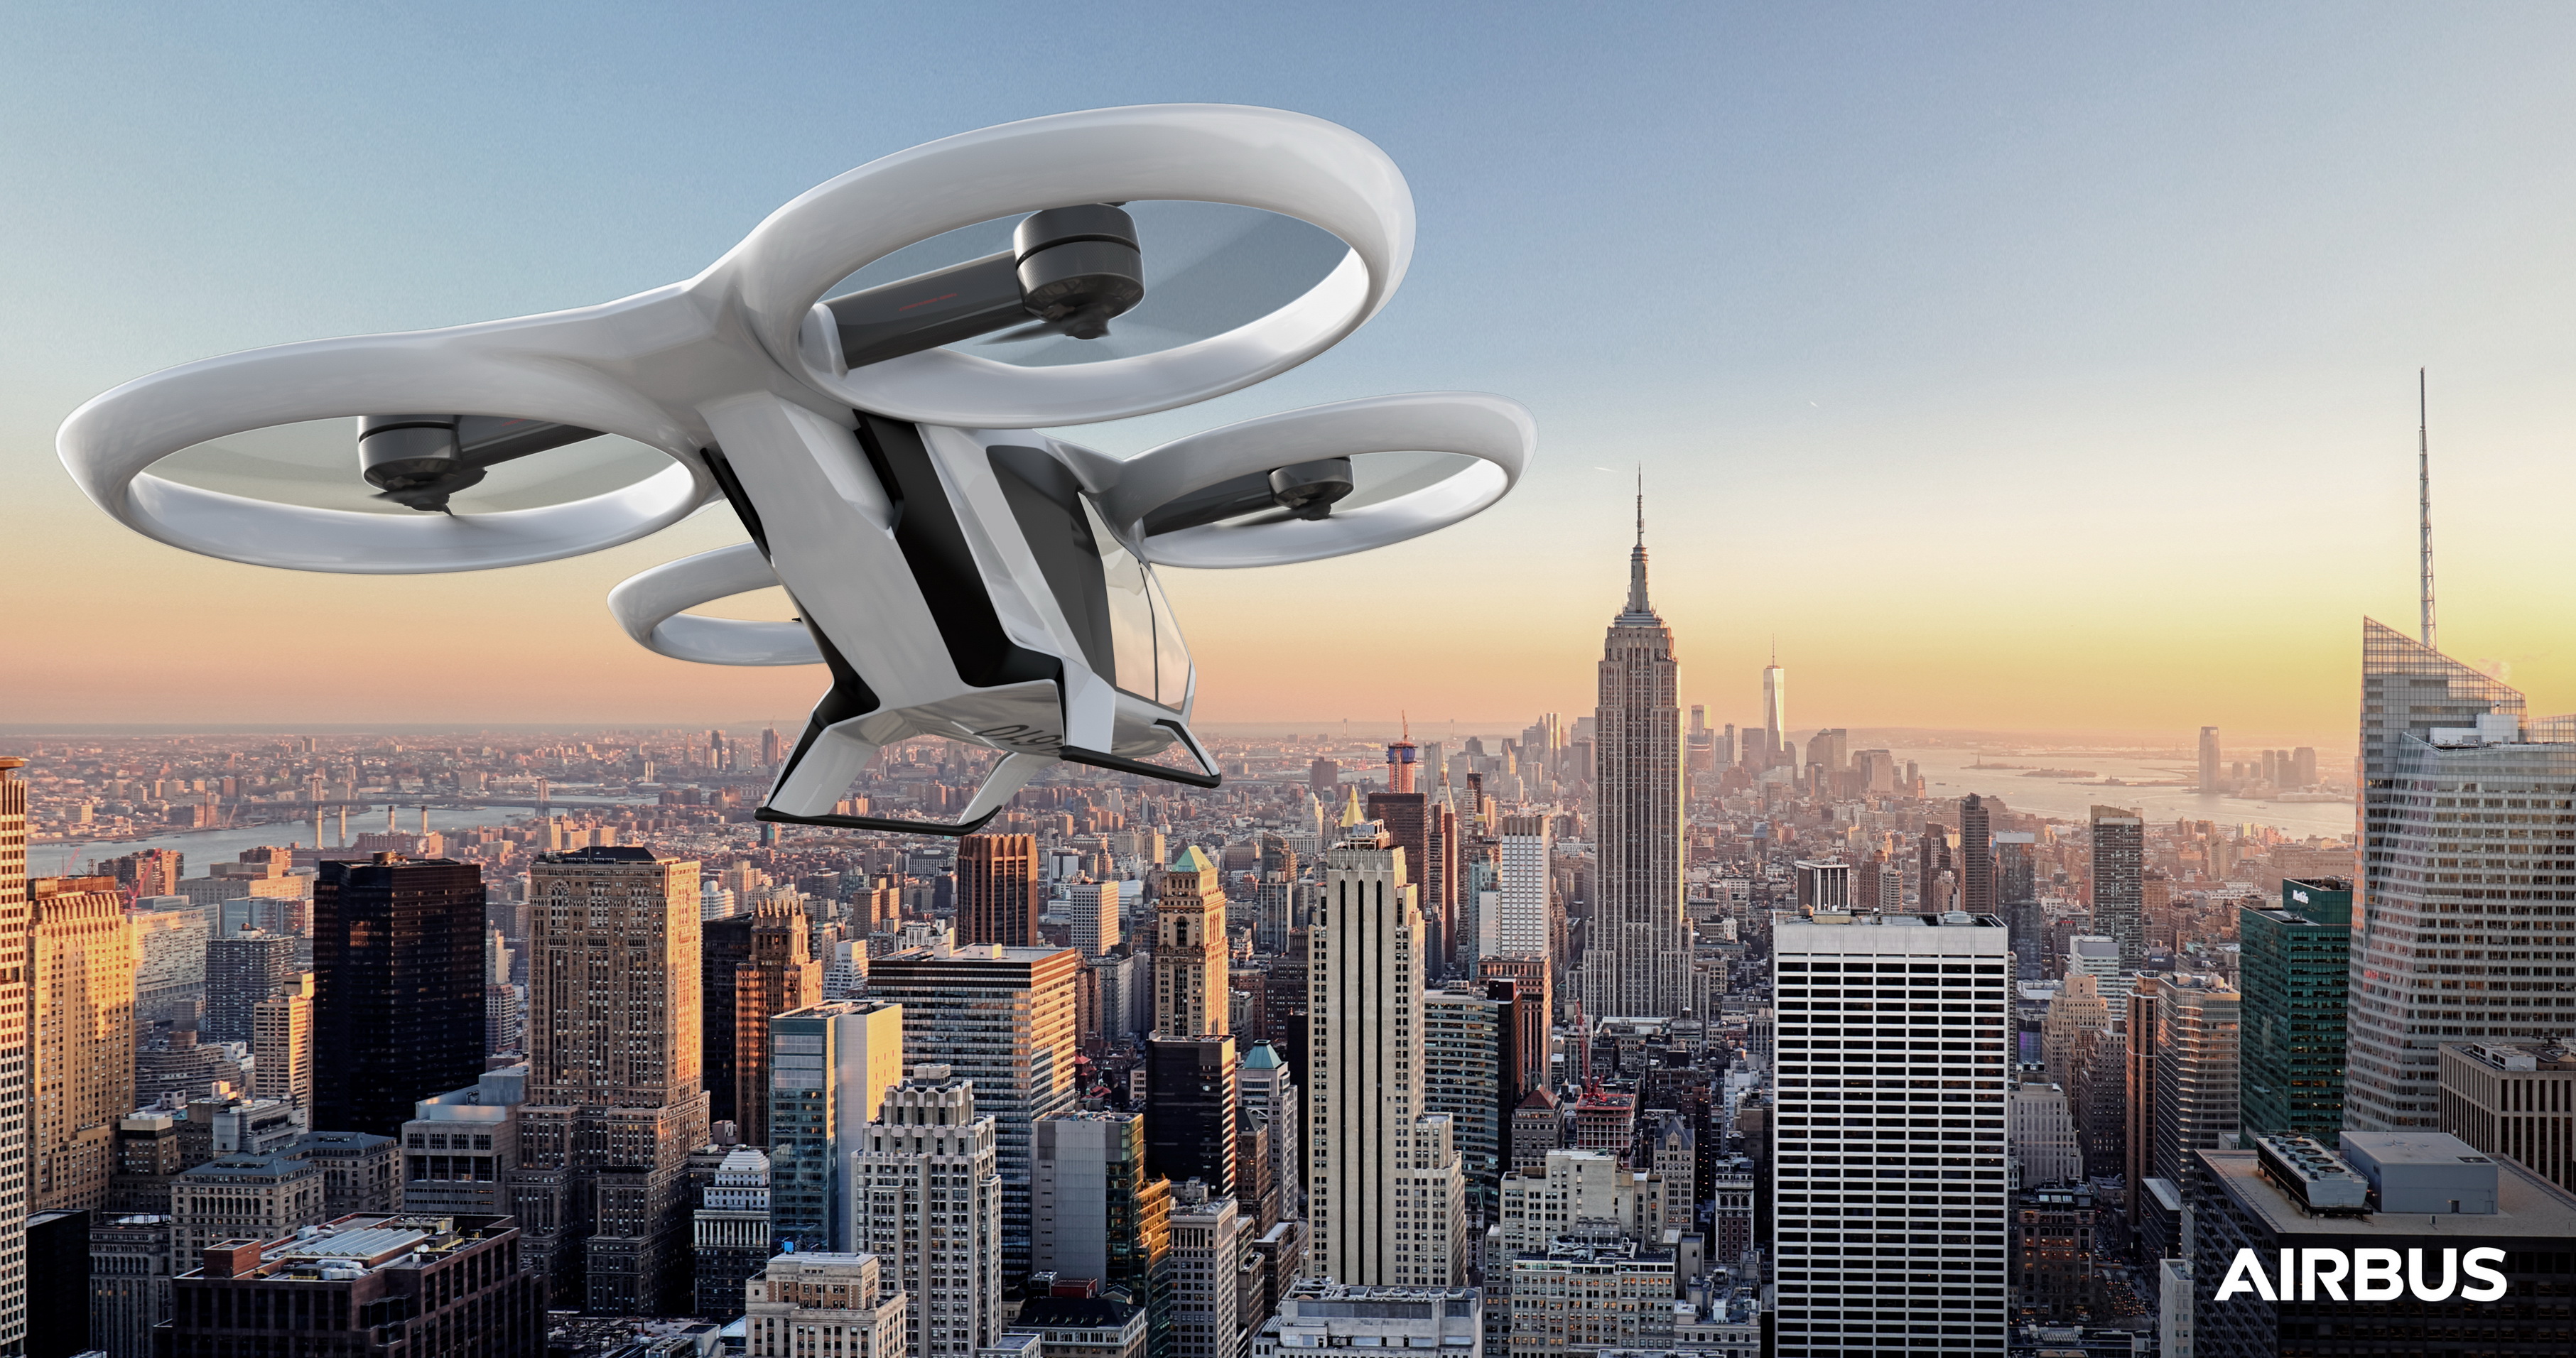 Airbus and HAX create an accelerator program for flying taxi tech